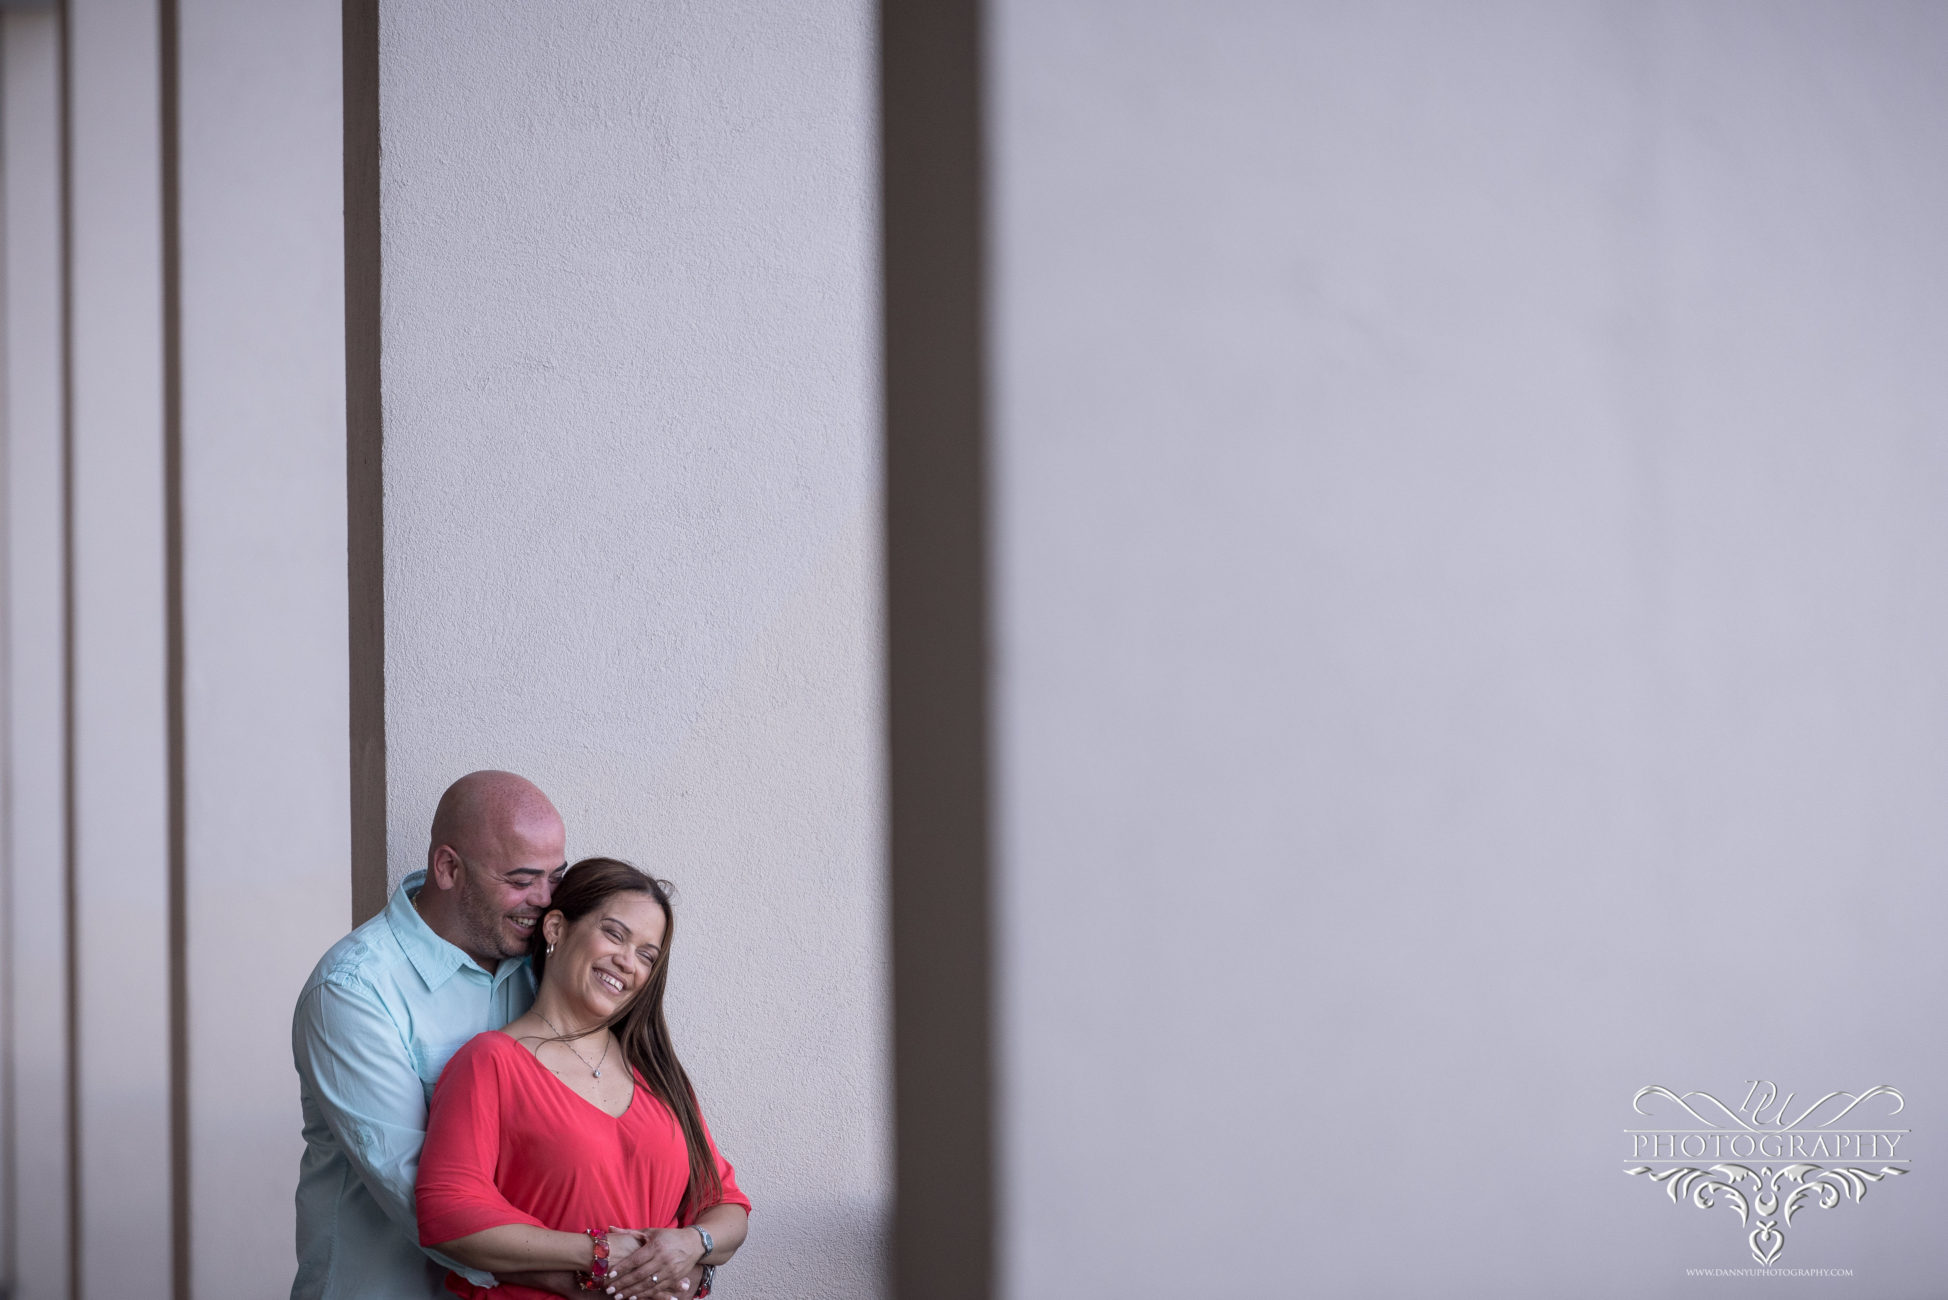 Engagement-Session-Photos-at-Exchange-Place-in-Jersey-City-NJ-10